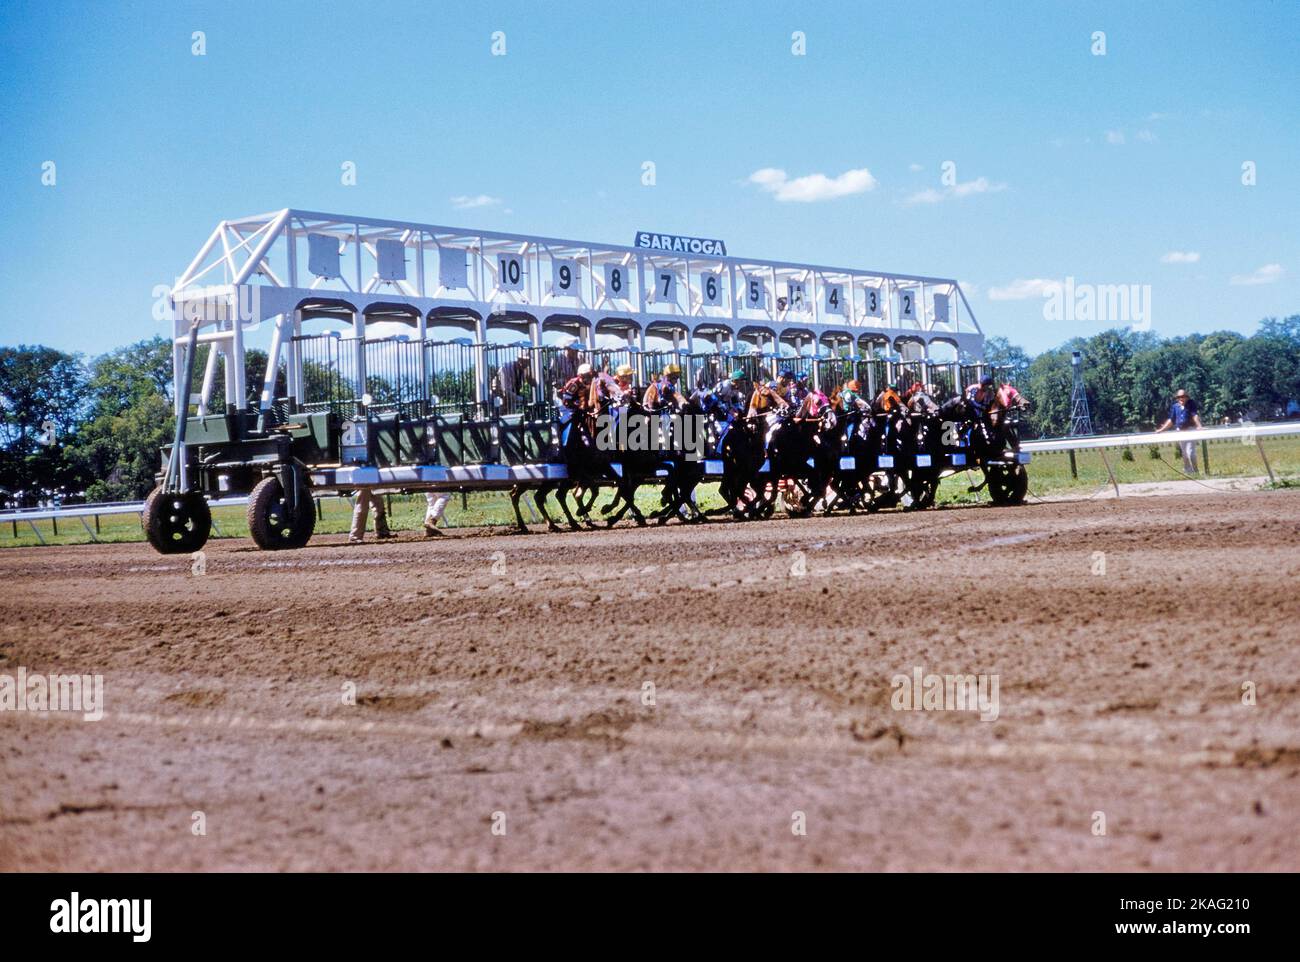 Start of Horse Race, Saratoga Springs, New York, USA, toni Frissell Collection, Agosto 1960 Foto Stock